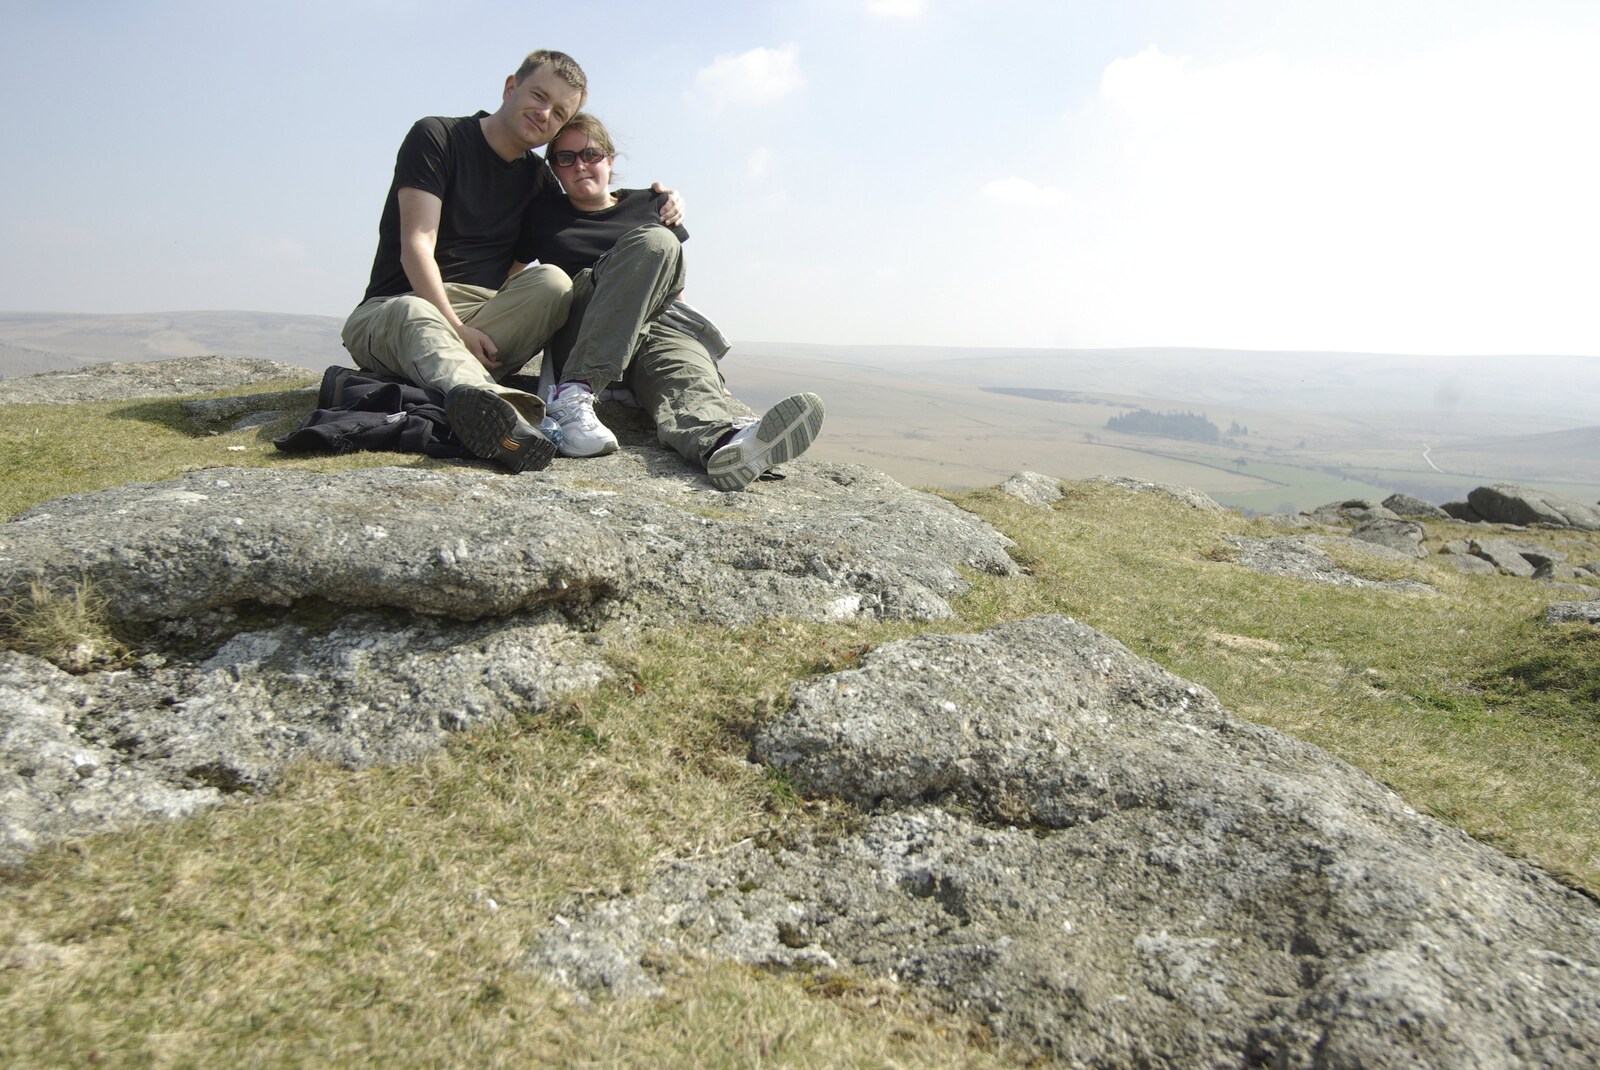 Nosher and Isobel on Sheepstor from A Walk up Sheepstor and Visiting Sis and Matt, Dartmoor and Chagford, Devon - 9th April 2007